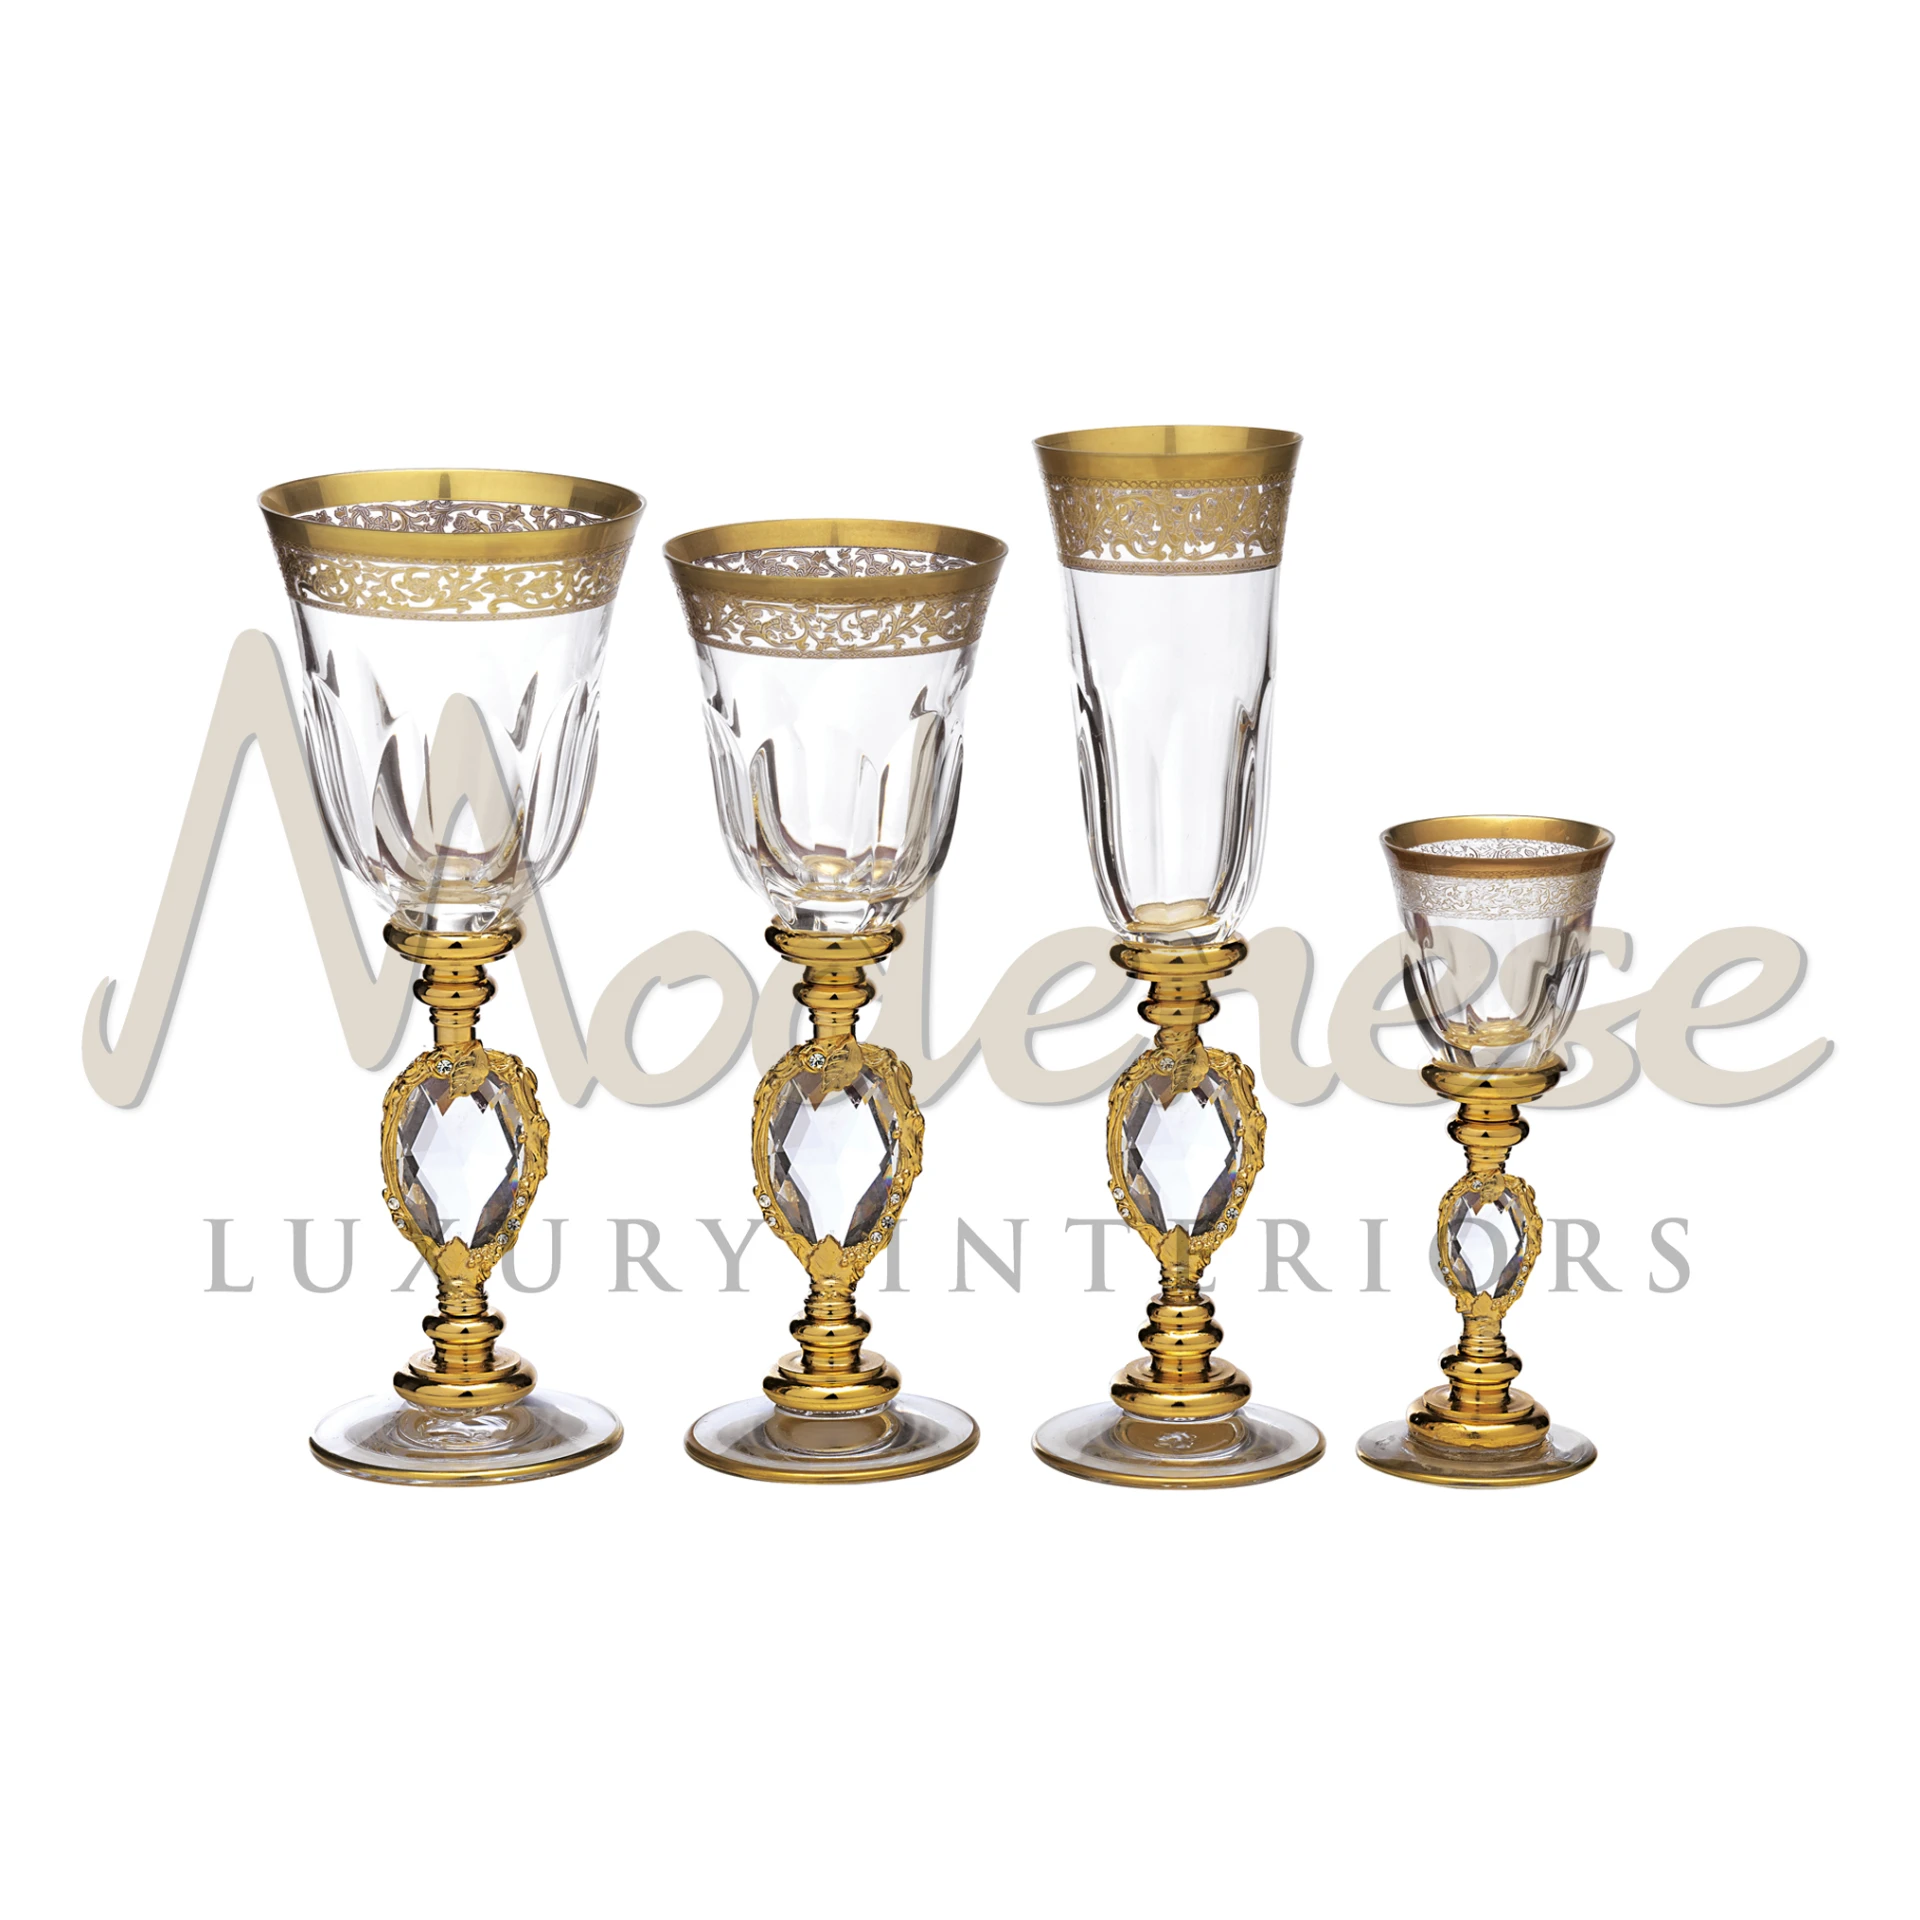 The 'Clear Crystal' glassware collection with elegant gold trim and transparent gemstones,